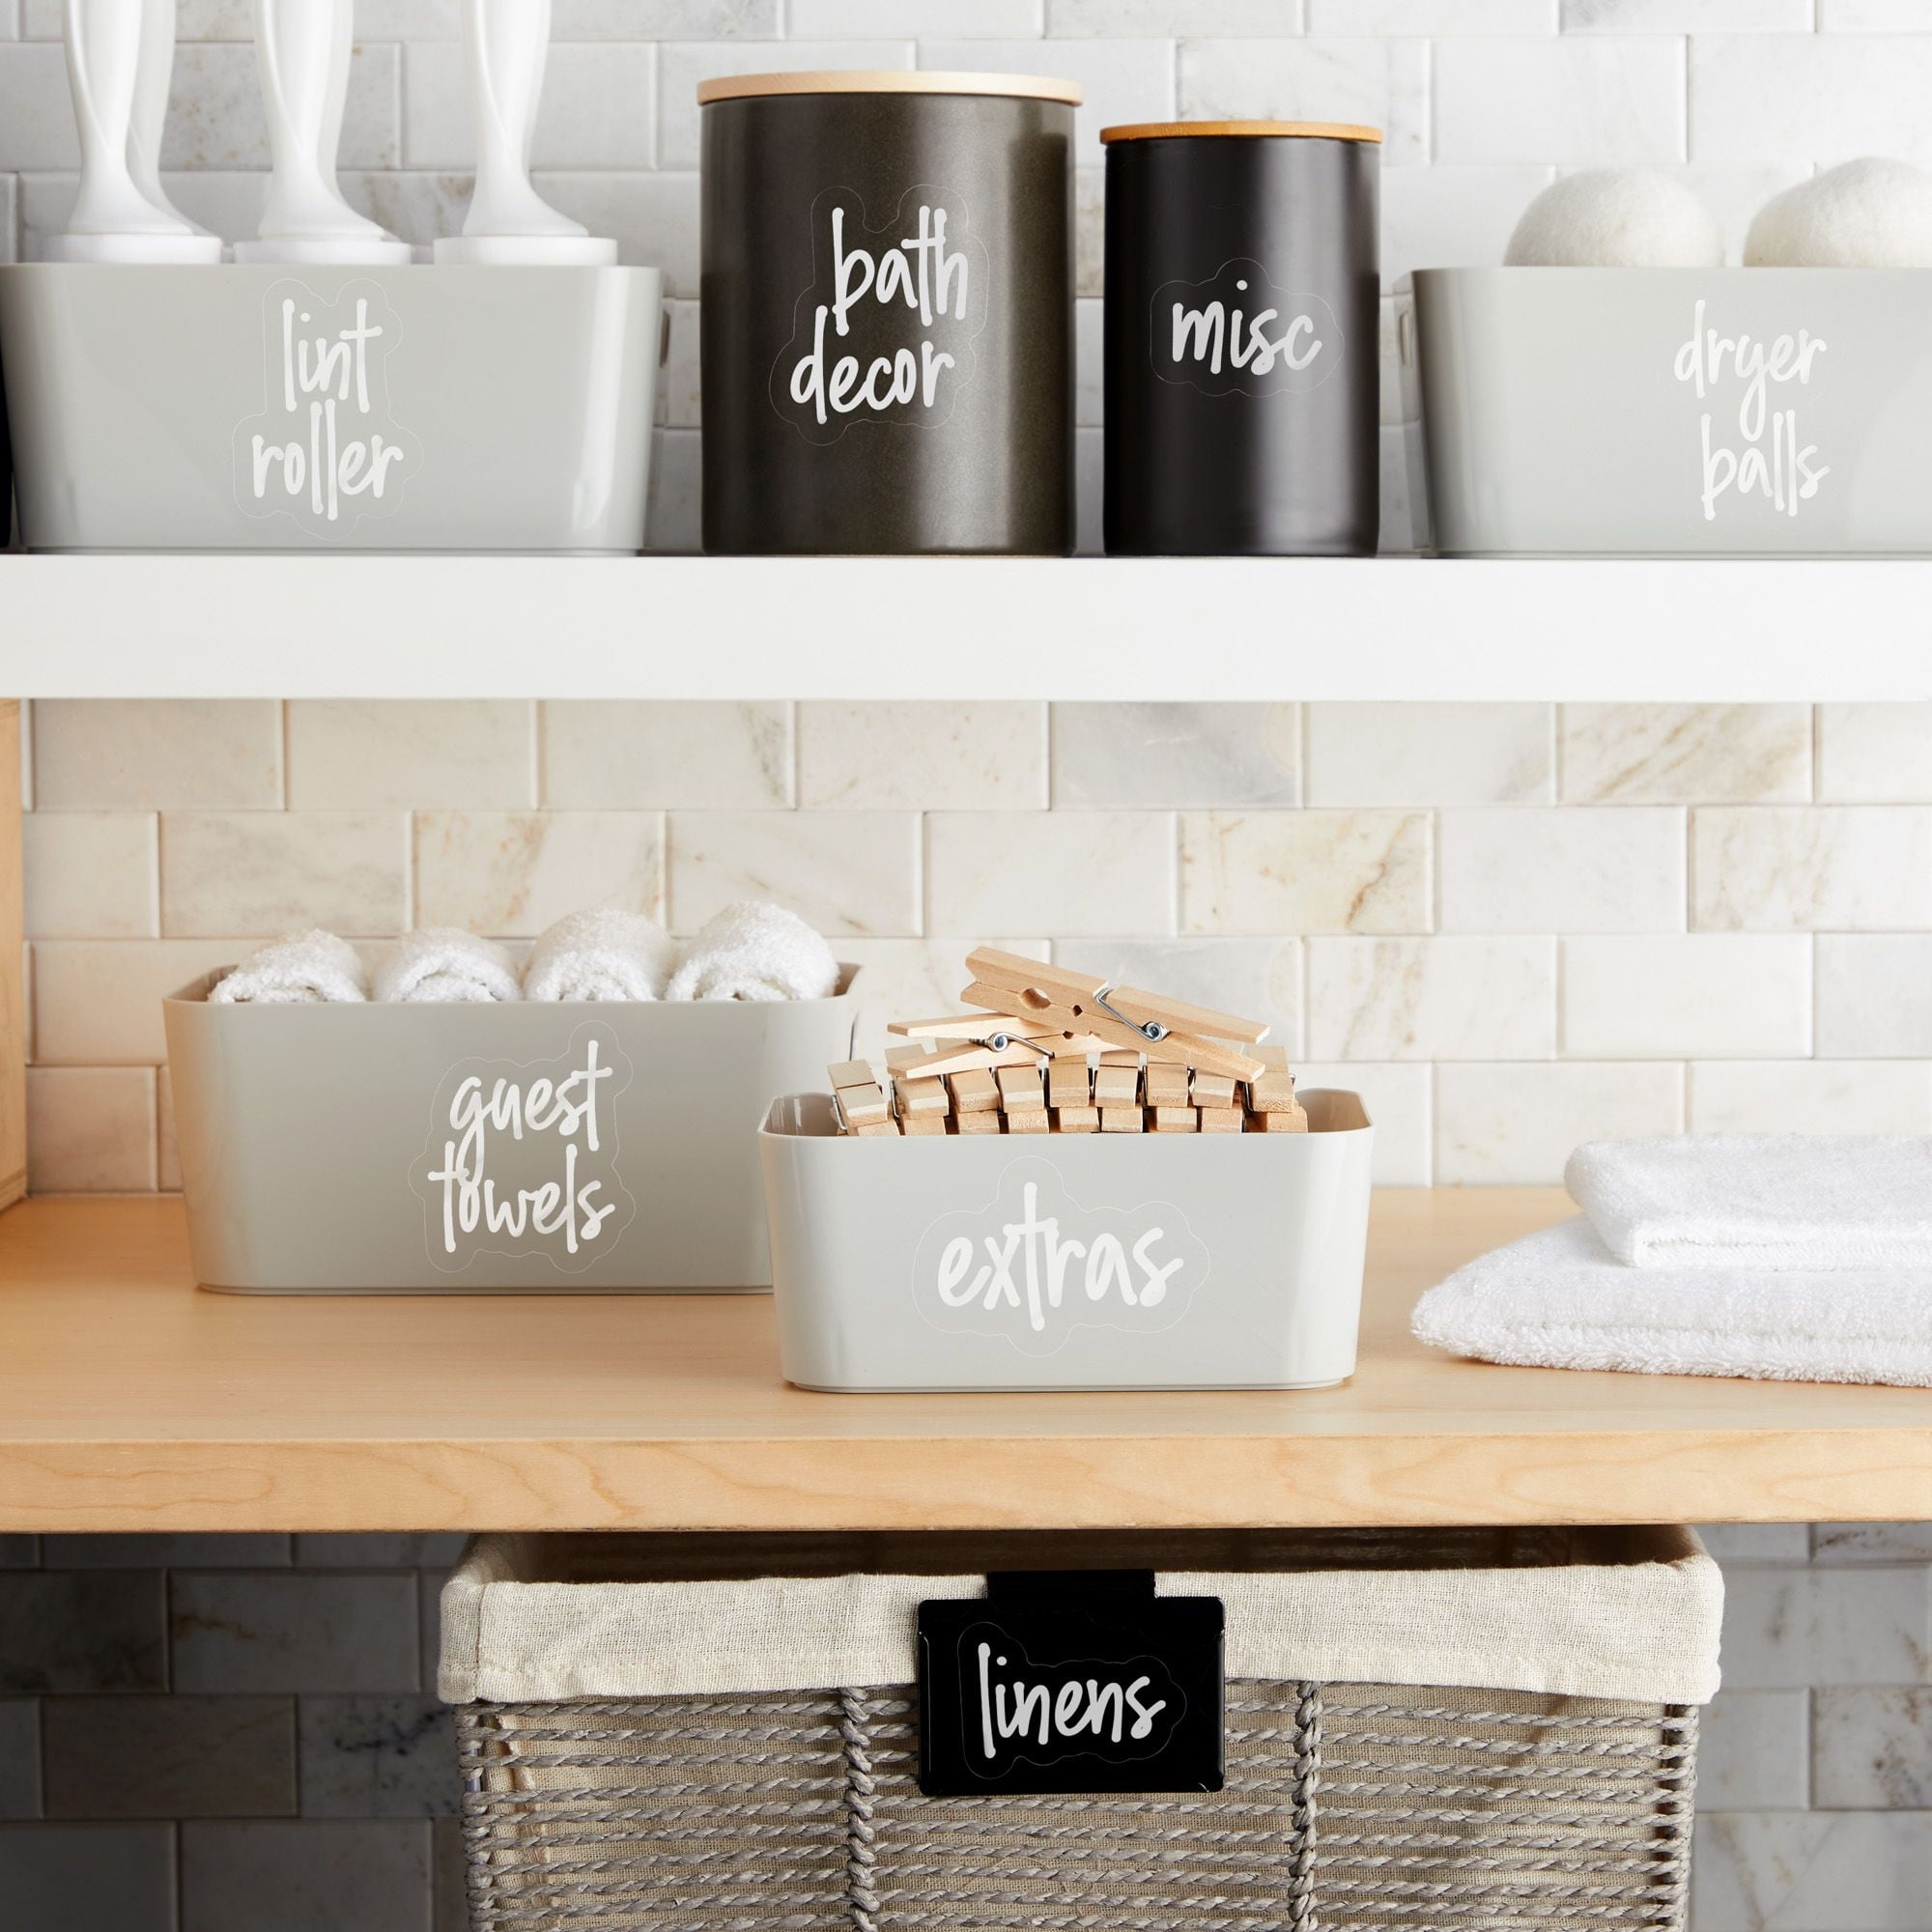 Bold All Caps Laundry Room, Linen Closet & Cleaning Supplies Labels Se –  Talented Kitchen